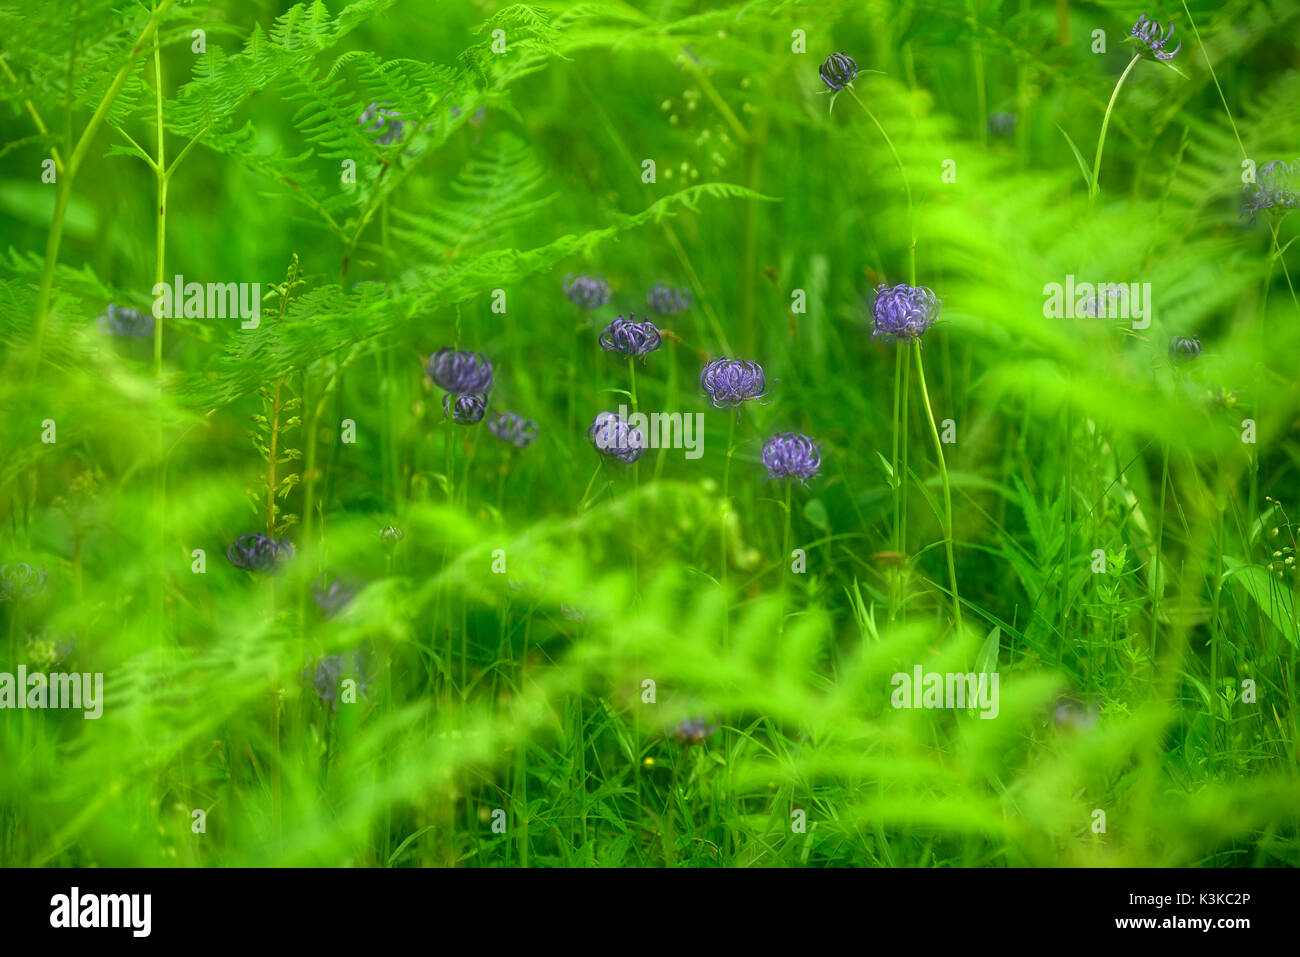 Devil's claws (Campanuloideae) between fresh young fern in a green meadow. Double exposure. Stock Photo